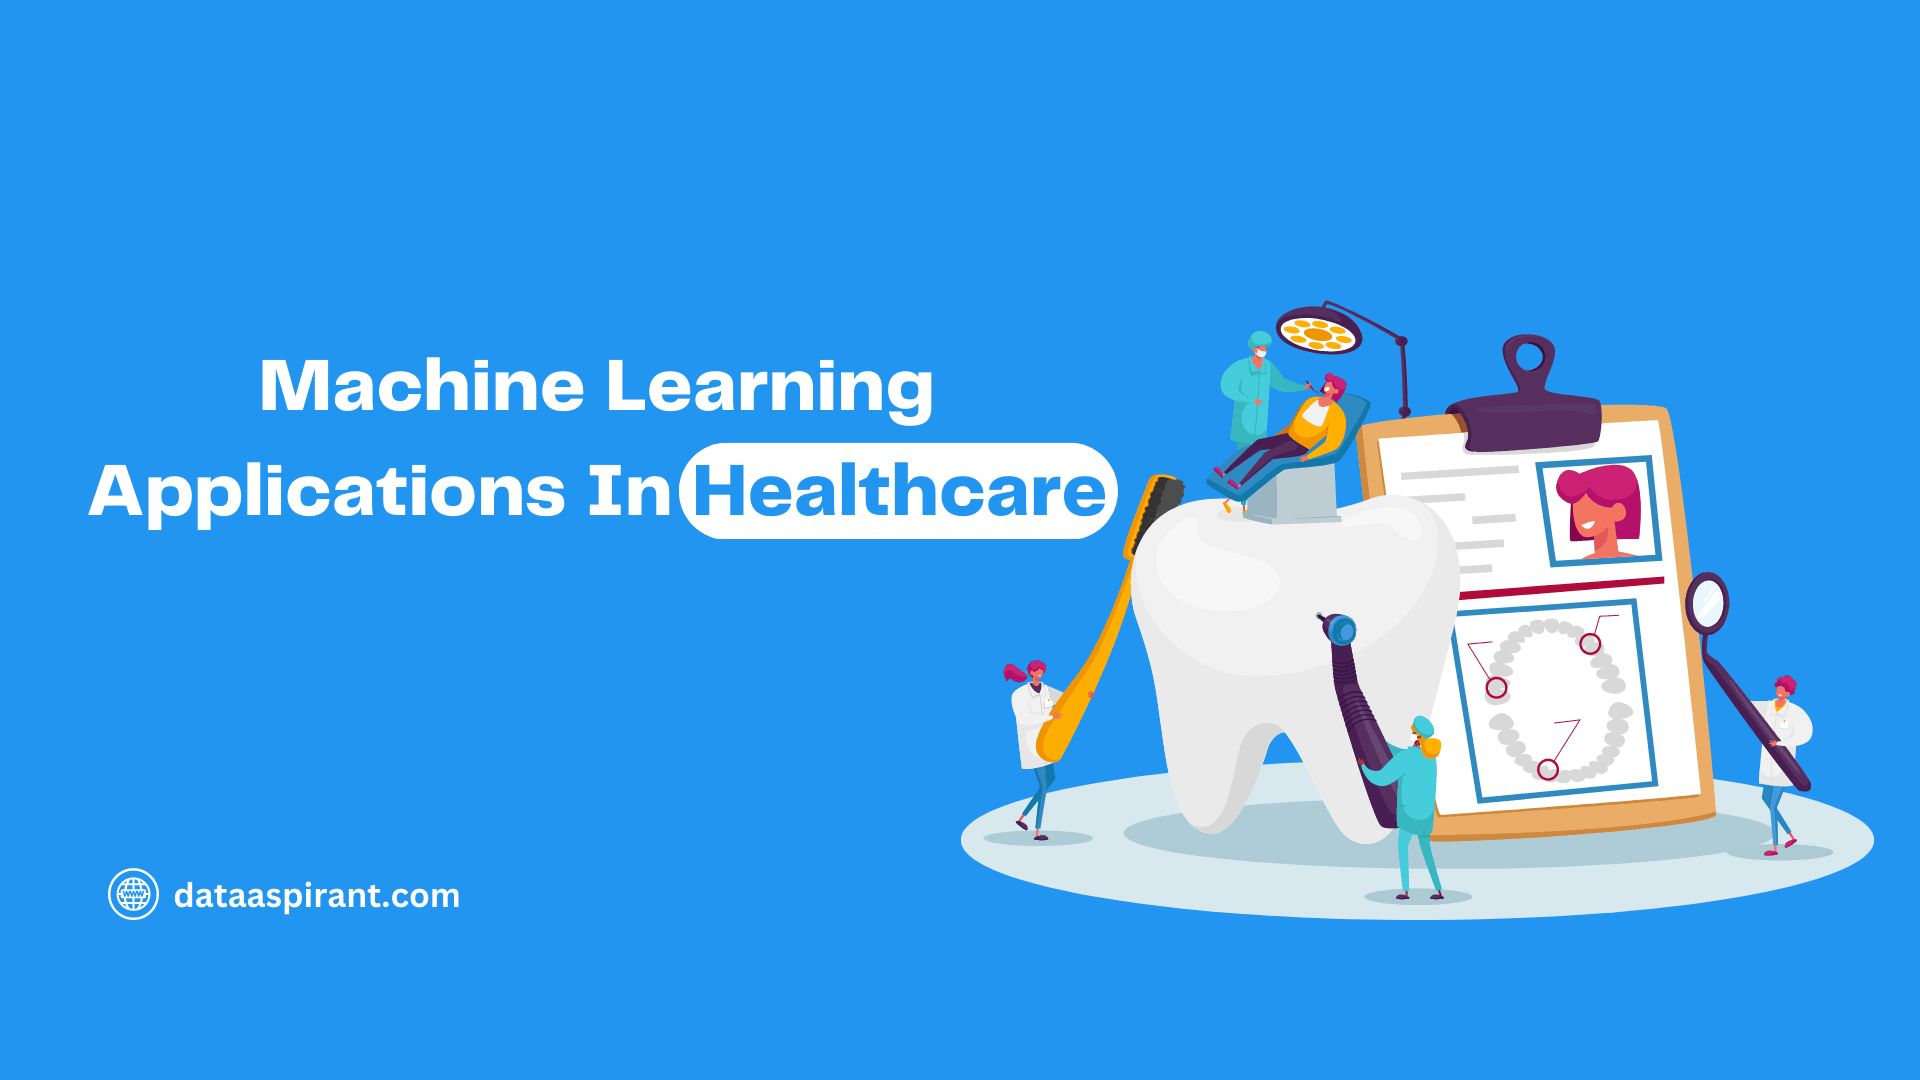 Machine Learning applications in Healthcare